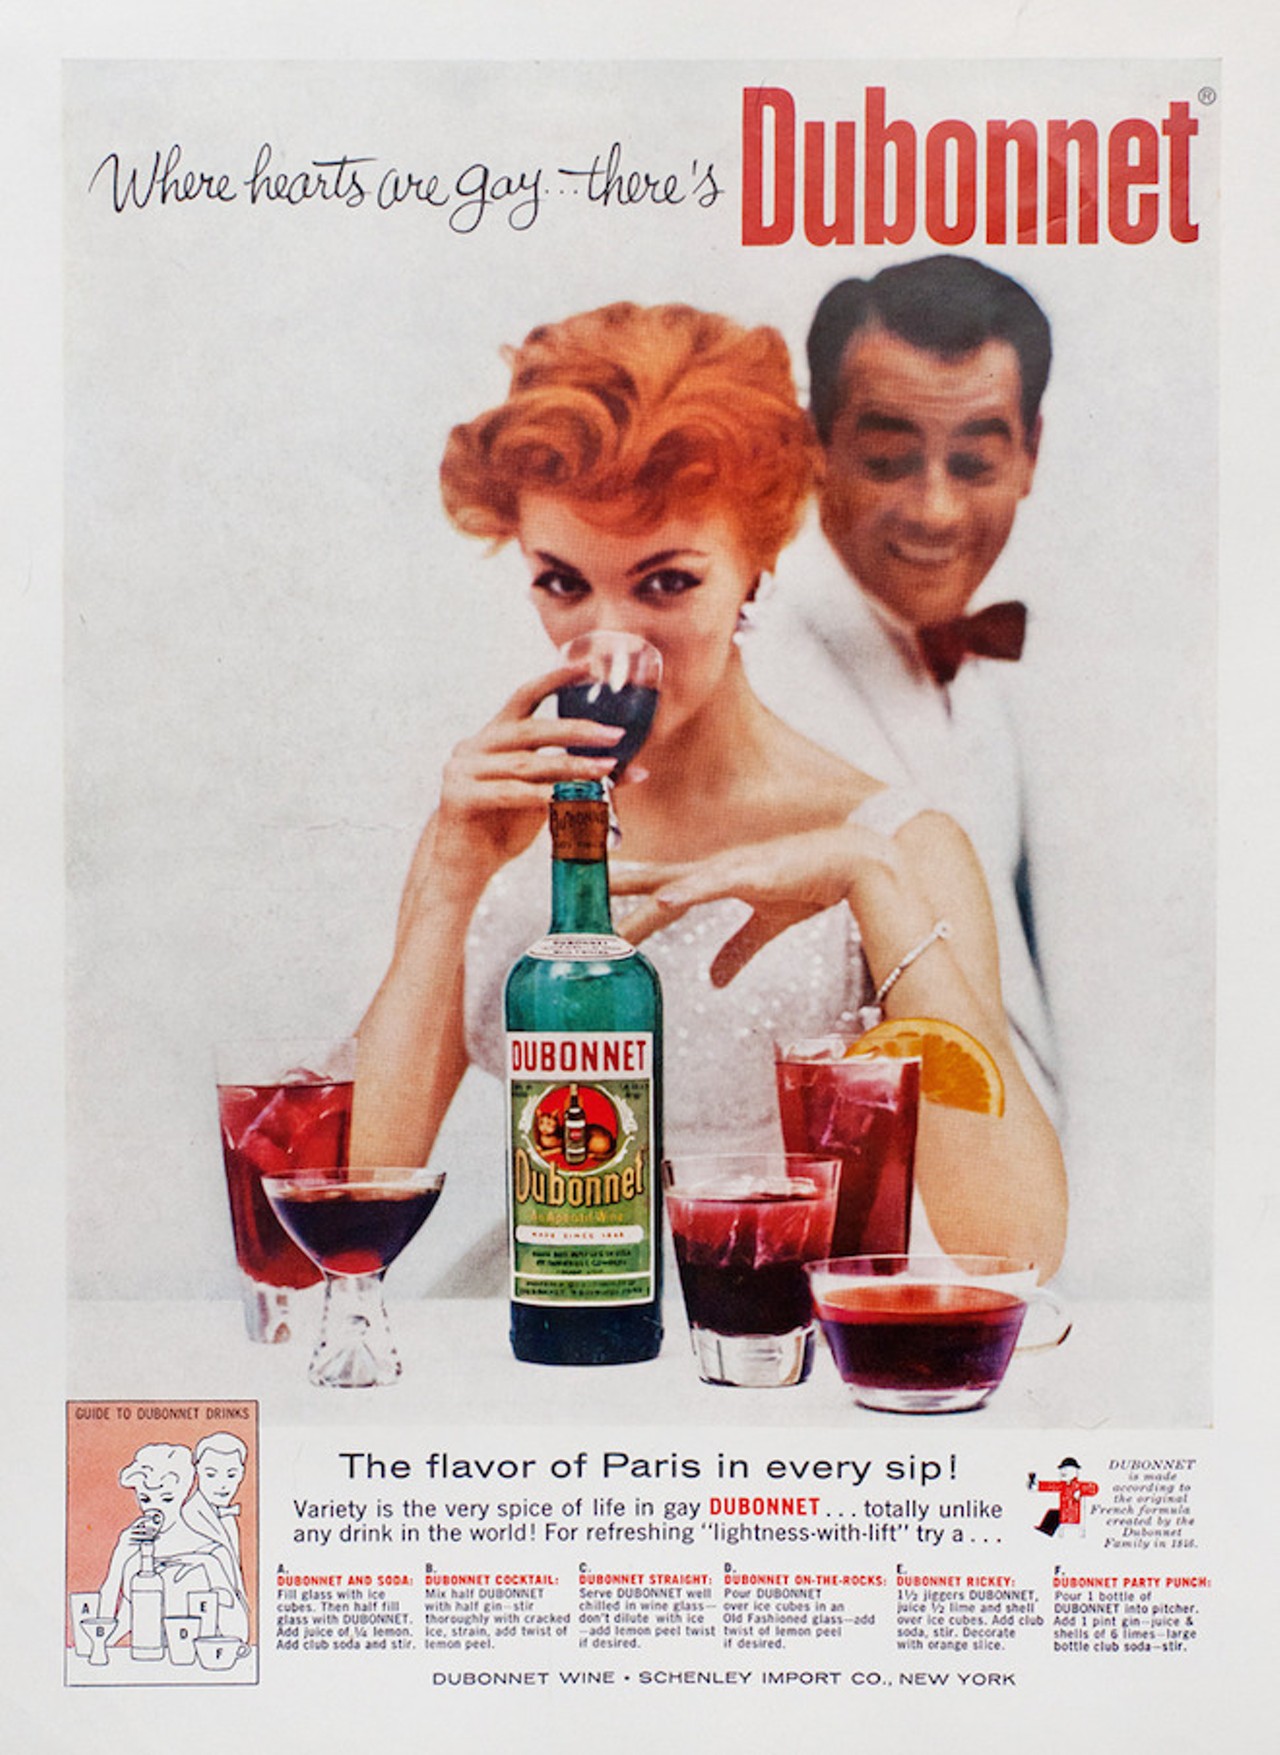 Let the &#146;60s and &#146;70s spirit suffuse your drinks station. Vintage liquor ads are inexpensive decor that&#146;s easy to procure on eBay or at Etsy shops like AdVintageCom, SaffronFields, RetroReveries and many more. A cheap IKEA frame is all you need to let that mildly racy, probably politically incorrect Madison Avenue magic sing.